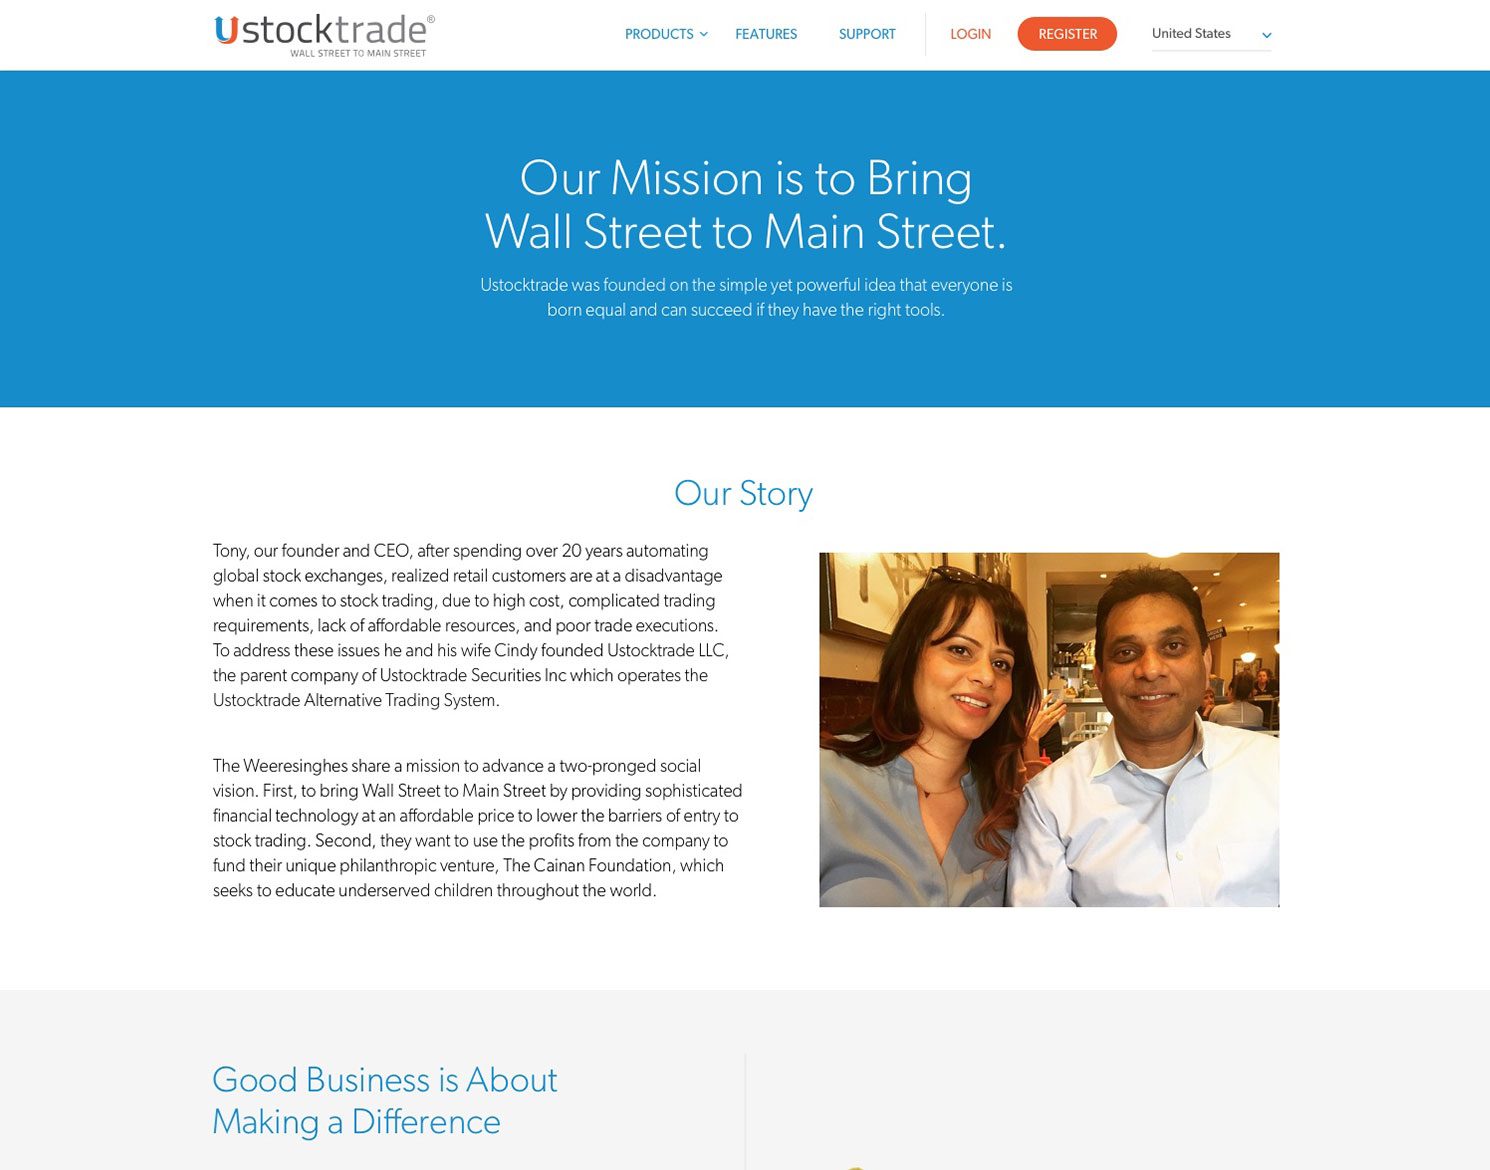 UST US Website - About